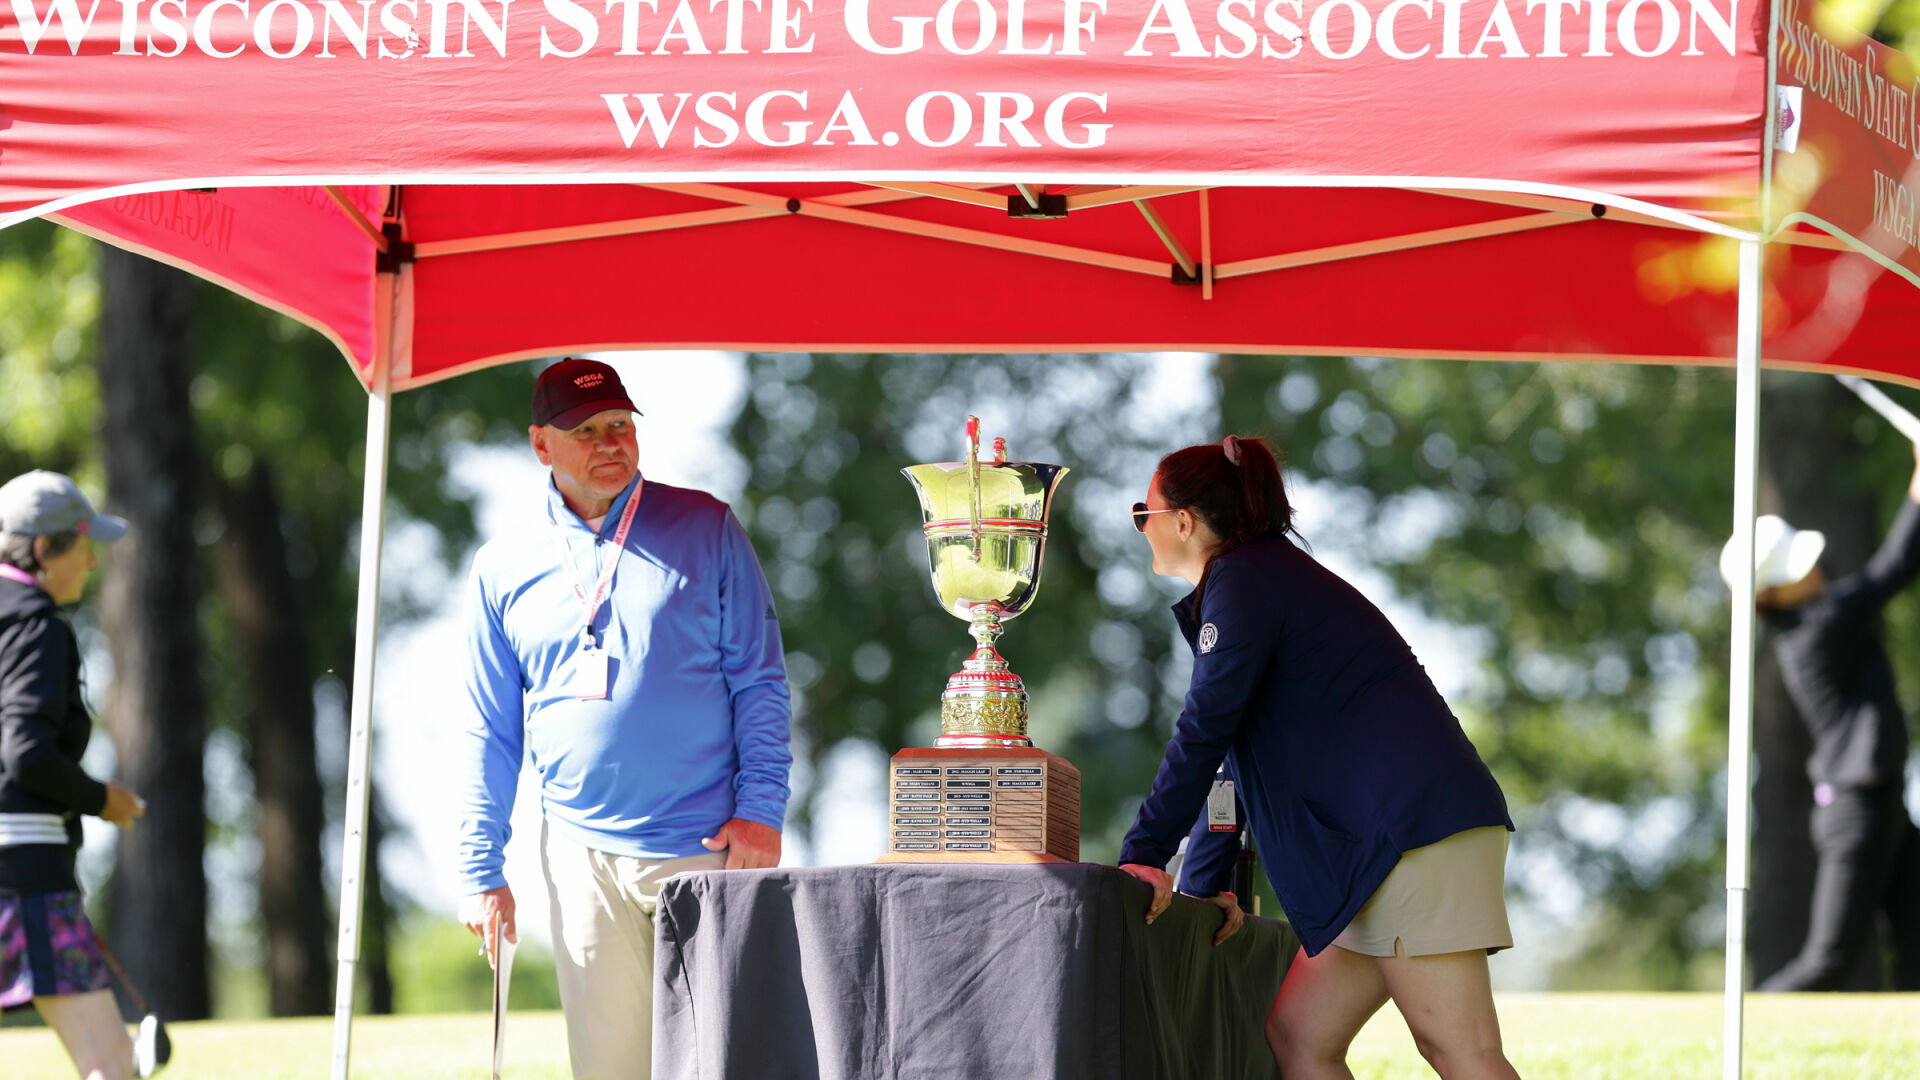 WSGA puts out call for college golfers, mid-ams in bid to grow womens golf through new opportunities on 2021 schedule WWSGA State Amateur wisconsin.golf